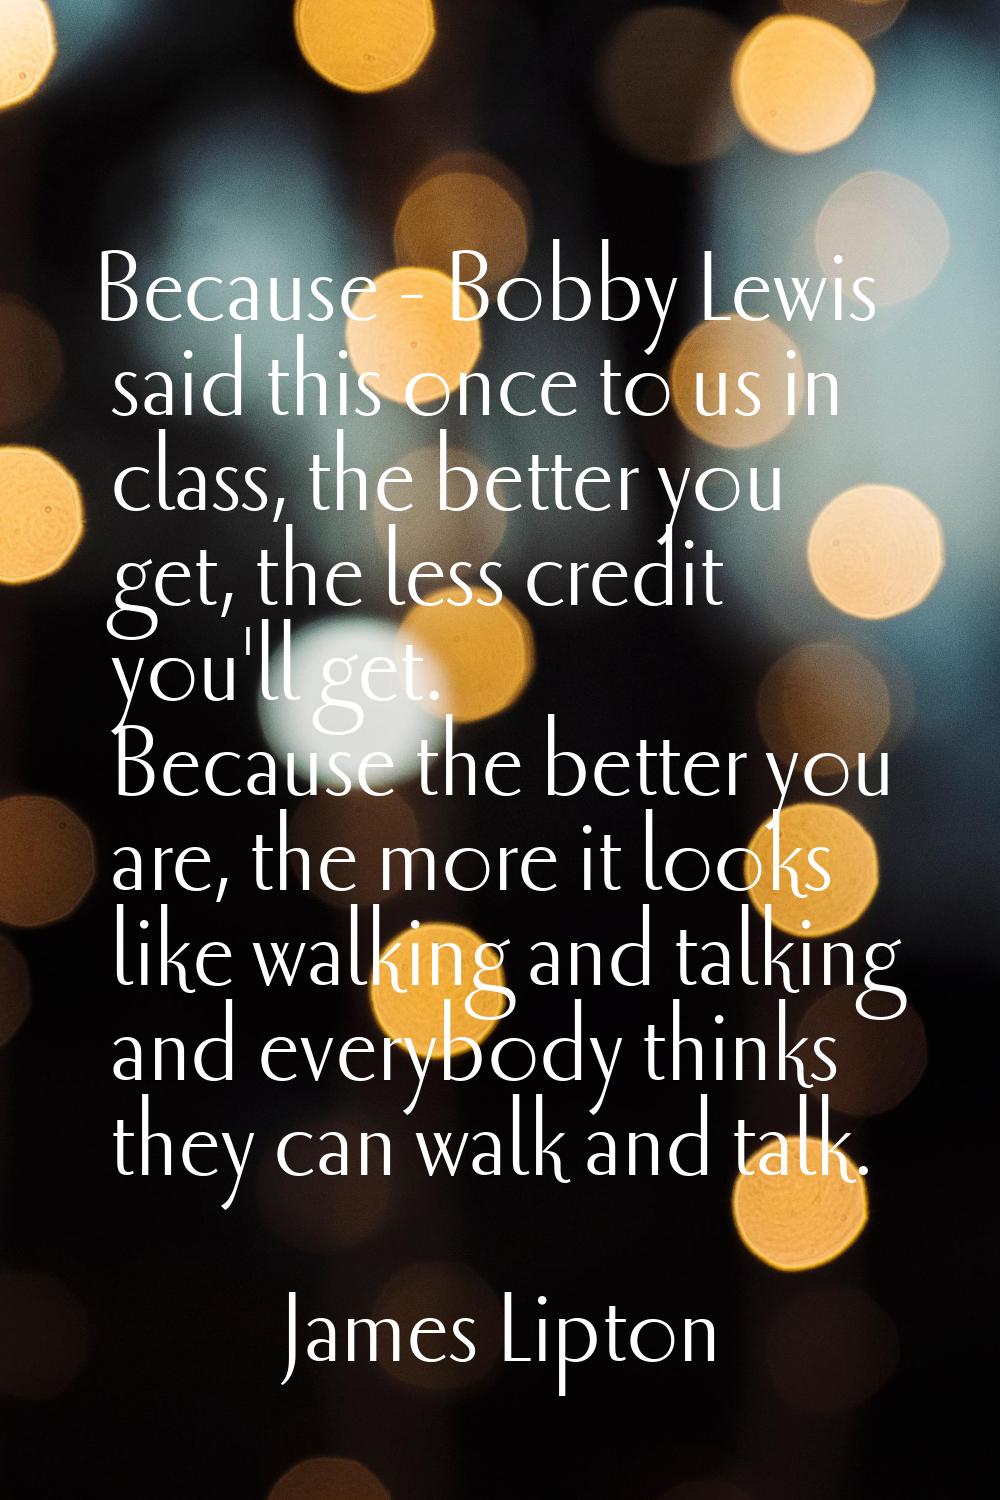 Because - Bobby Lewis said this once to us in class, the better you get, the less credit you'll get